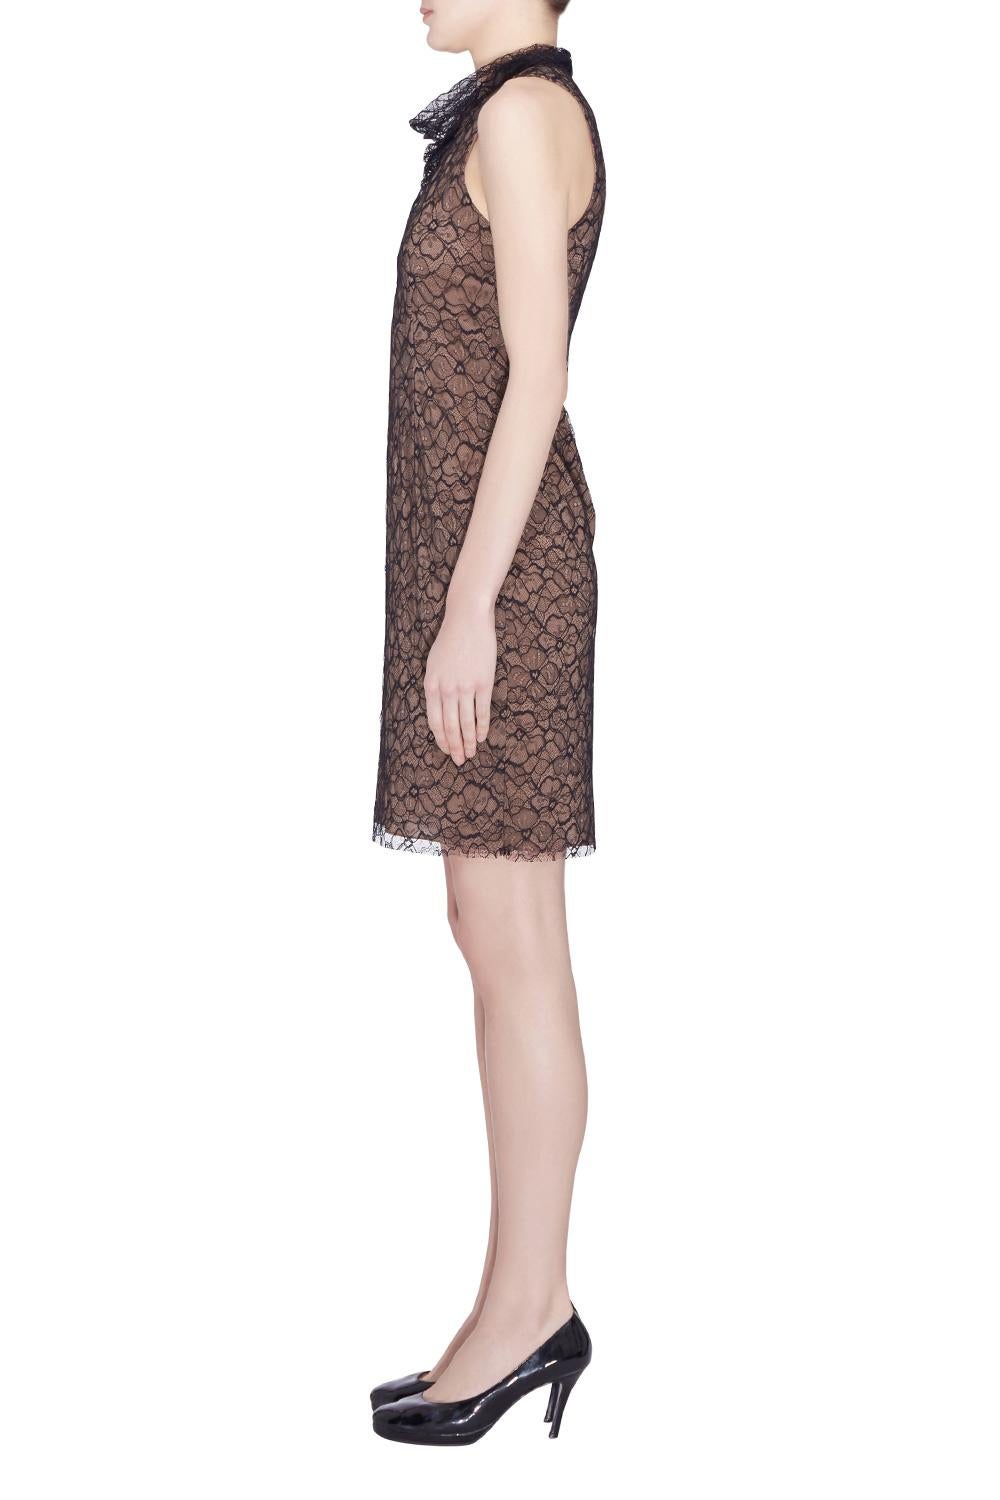 Brown Vera Wang Collection Black Floral Lace High Cowl Neck Sleeveless Dress S